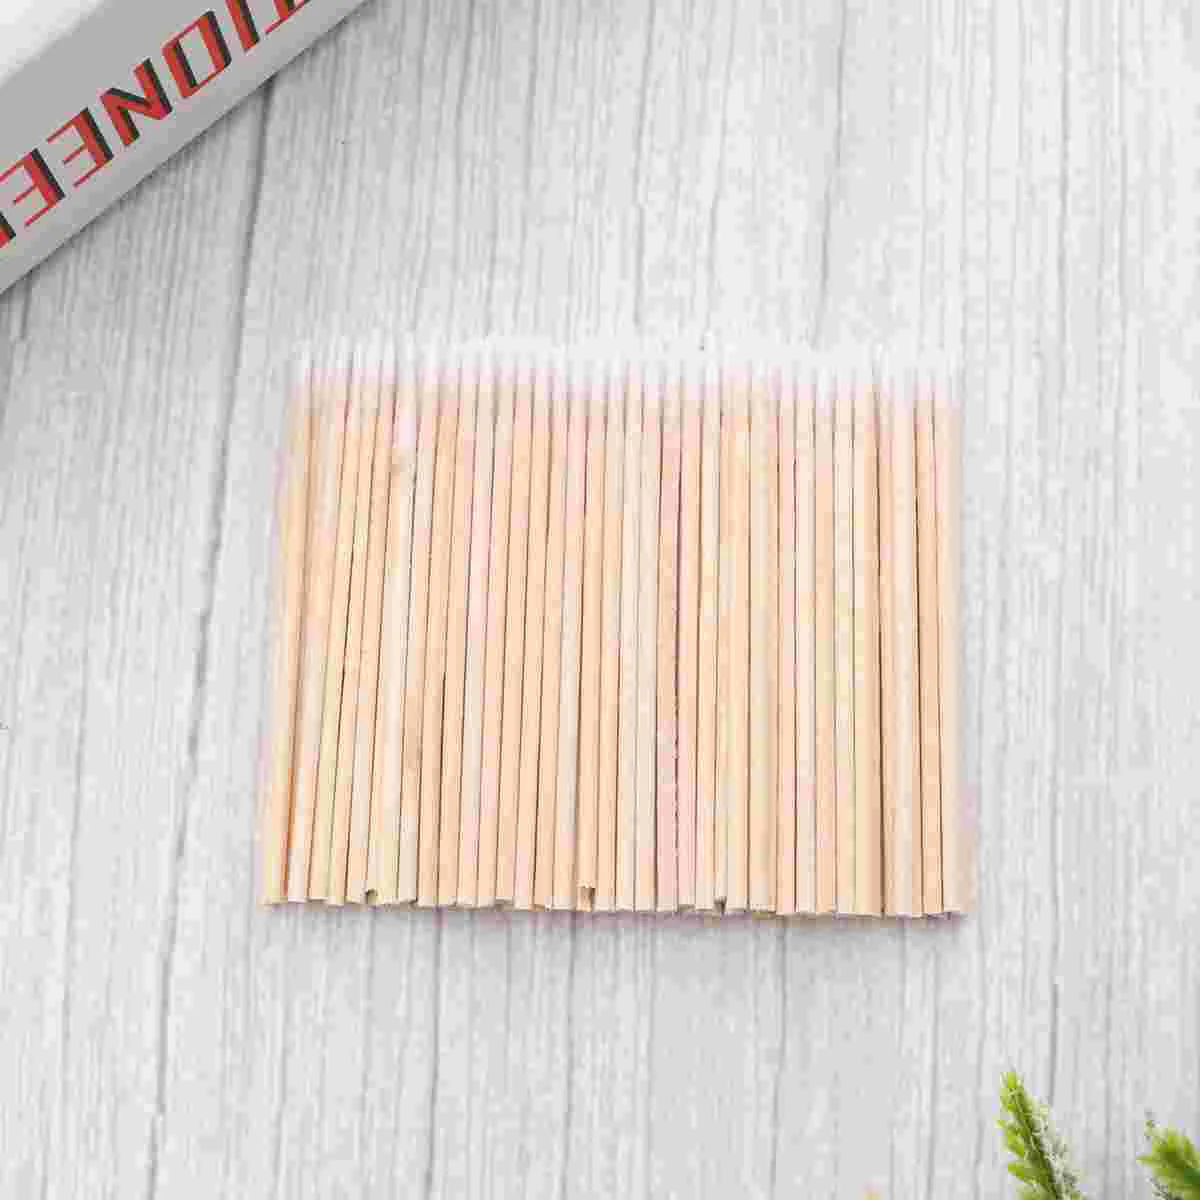 

7 Packs Toothpick Cotton Swab for Makeup Rod Eyelash Extension Pointed Swabs Disposable